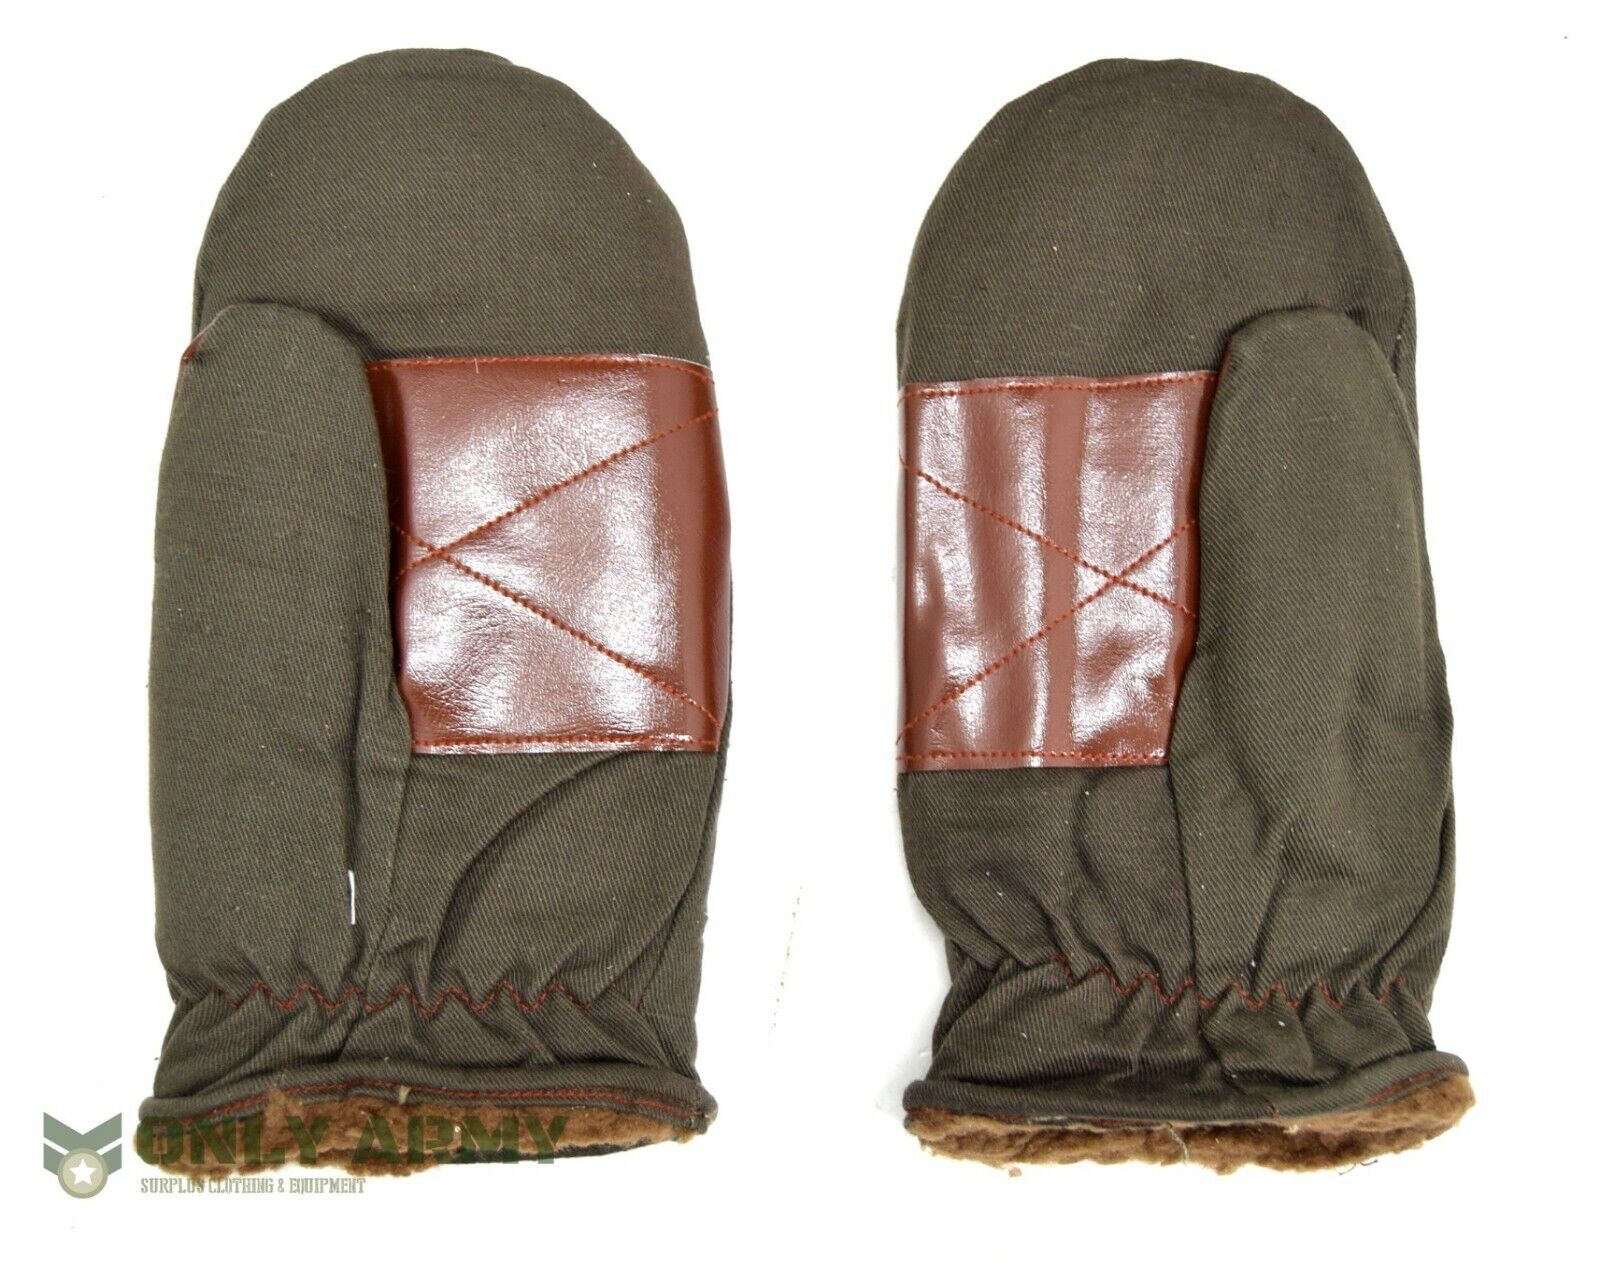 1960s Czech Army Cold Weather Mittens Fur Lined Winter Gloves Mits New Old Stock